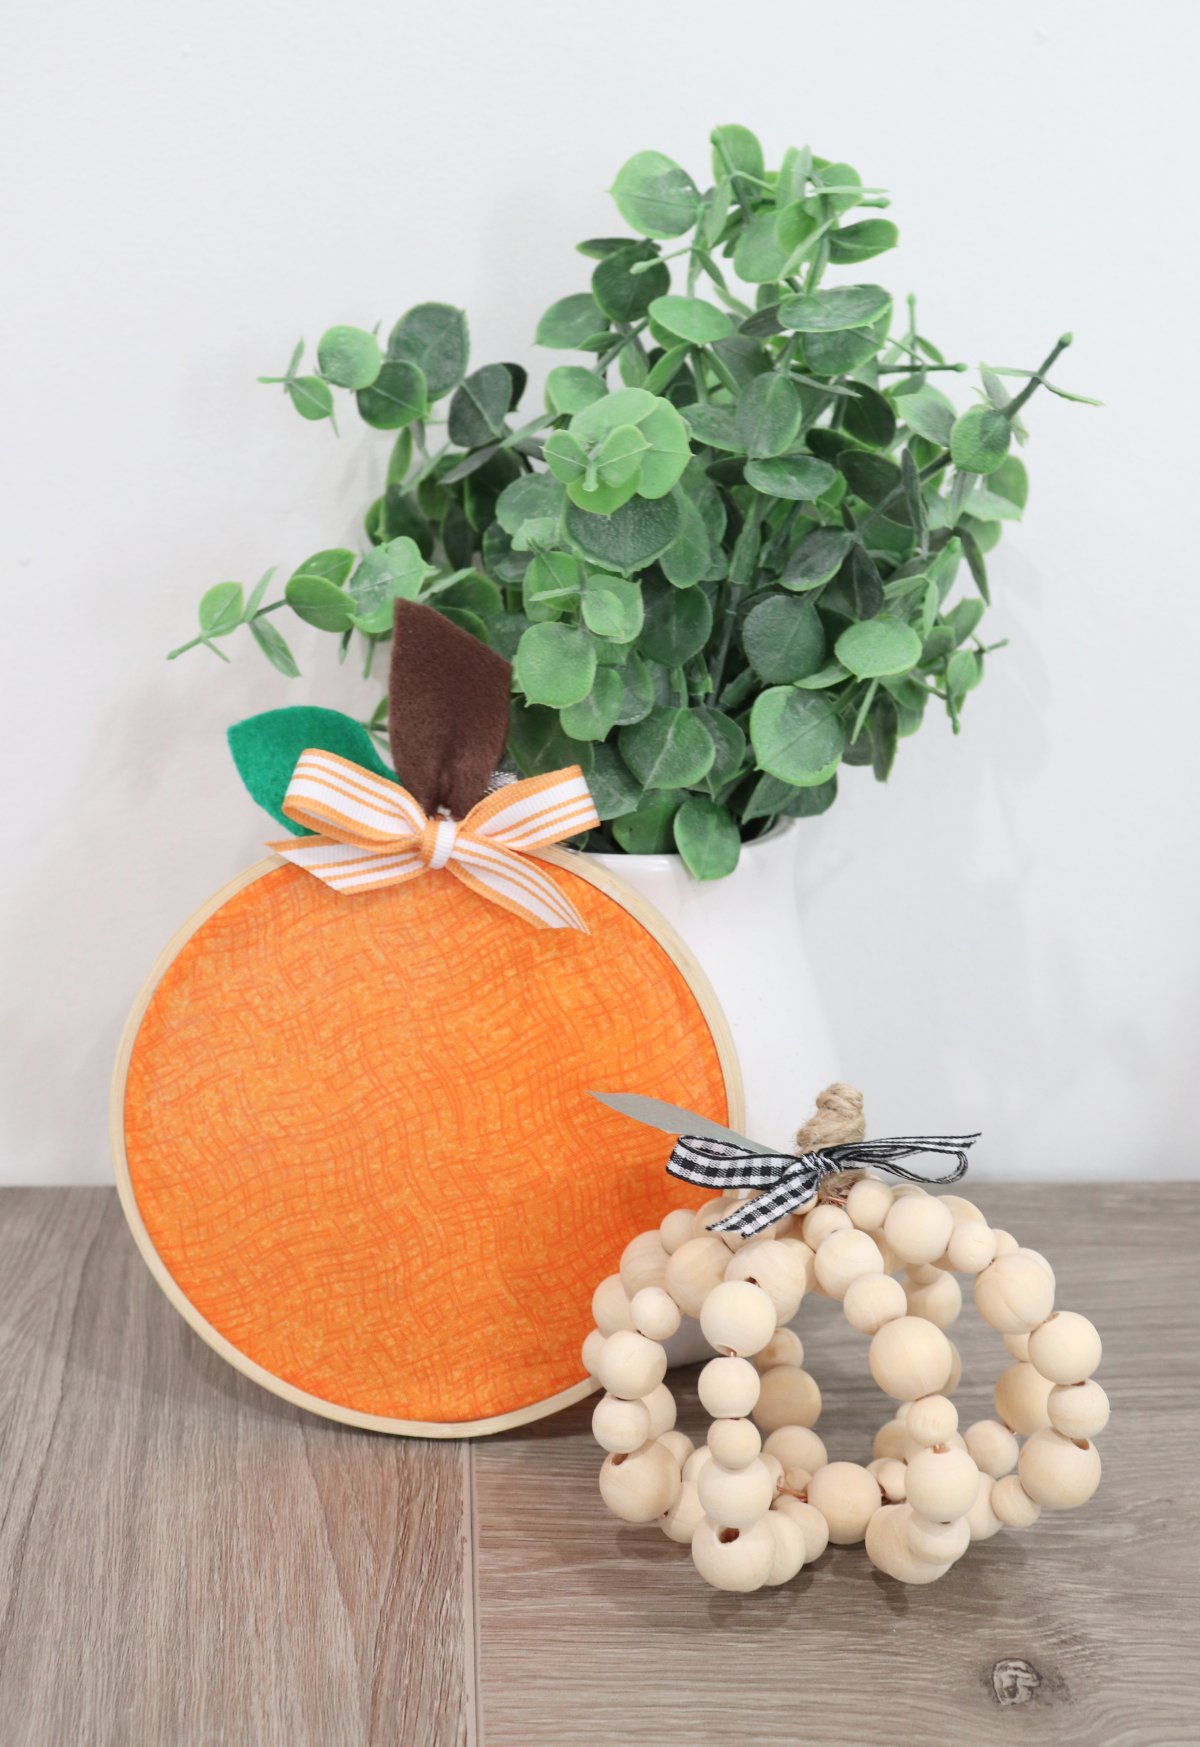 Image contains a pumpkin made from wooden beads, an orange pumpkin made from fabric in an embroidery hoop, and a white vase with faux eucalyptus.